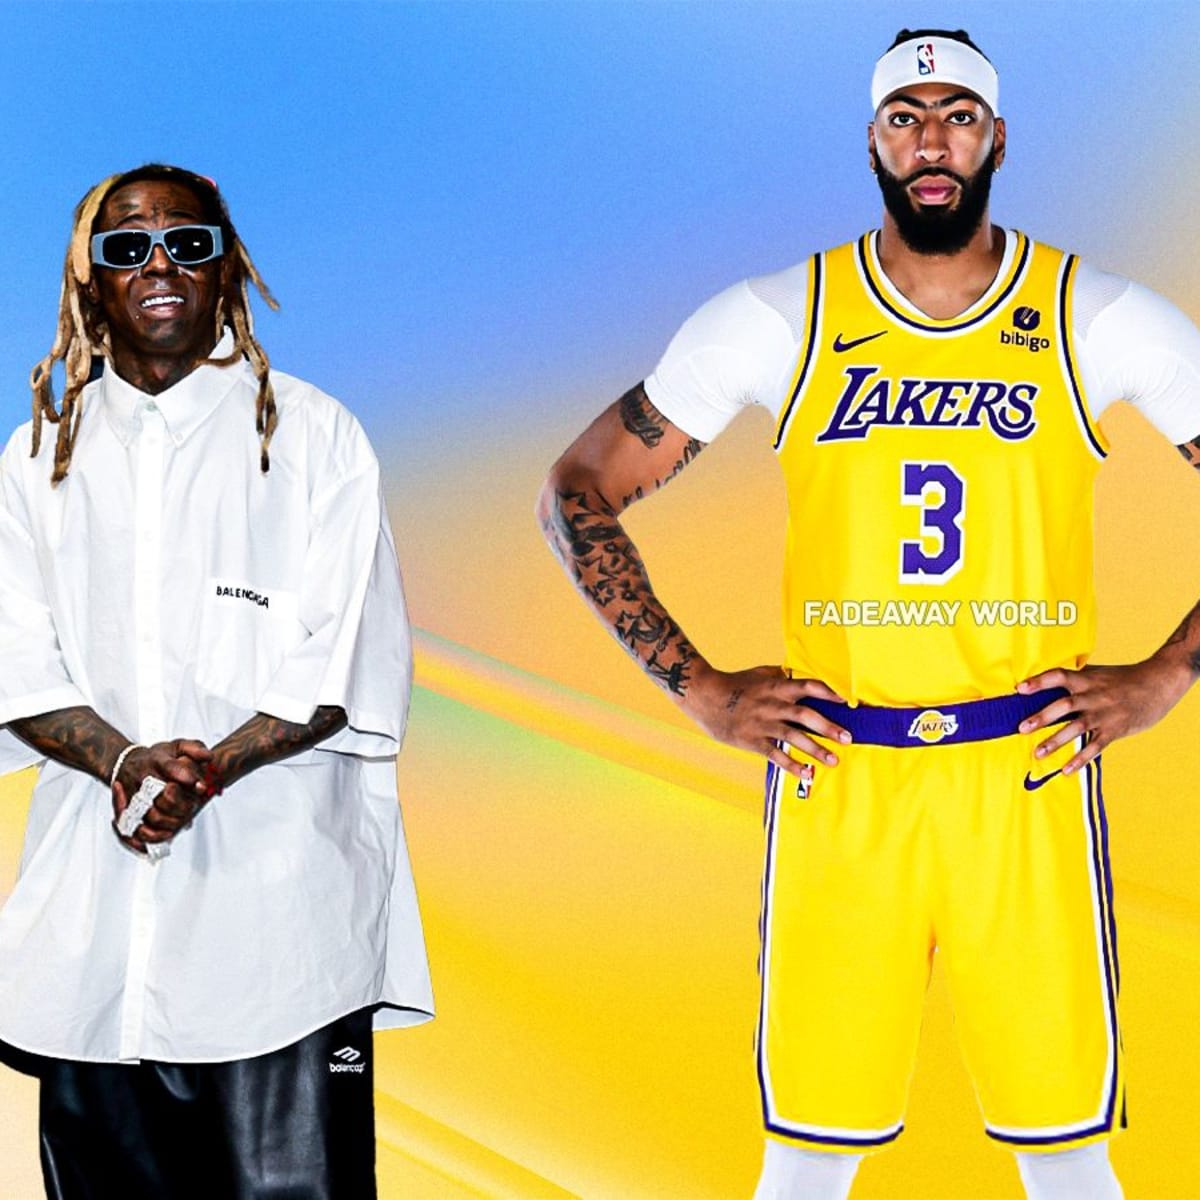 Lil Wayne was angry and criticized the Lakers just because of a small action by Anthony Davis